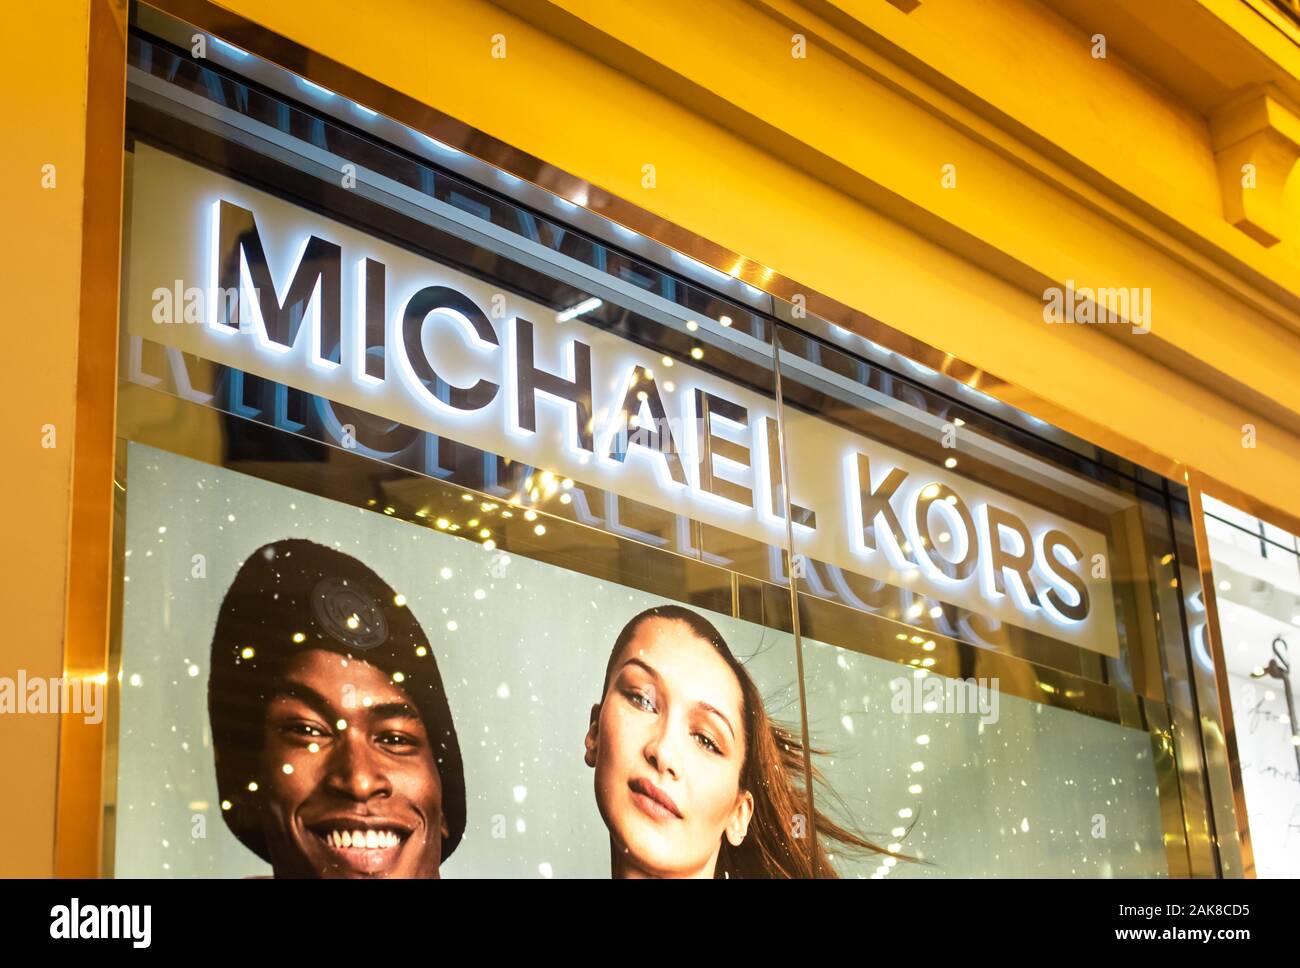 01/01/2020 - Beverly Hills, CA: Michael Kors store sign in Grove,Beverly Hills, LA,CA, USA. Stock Photo